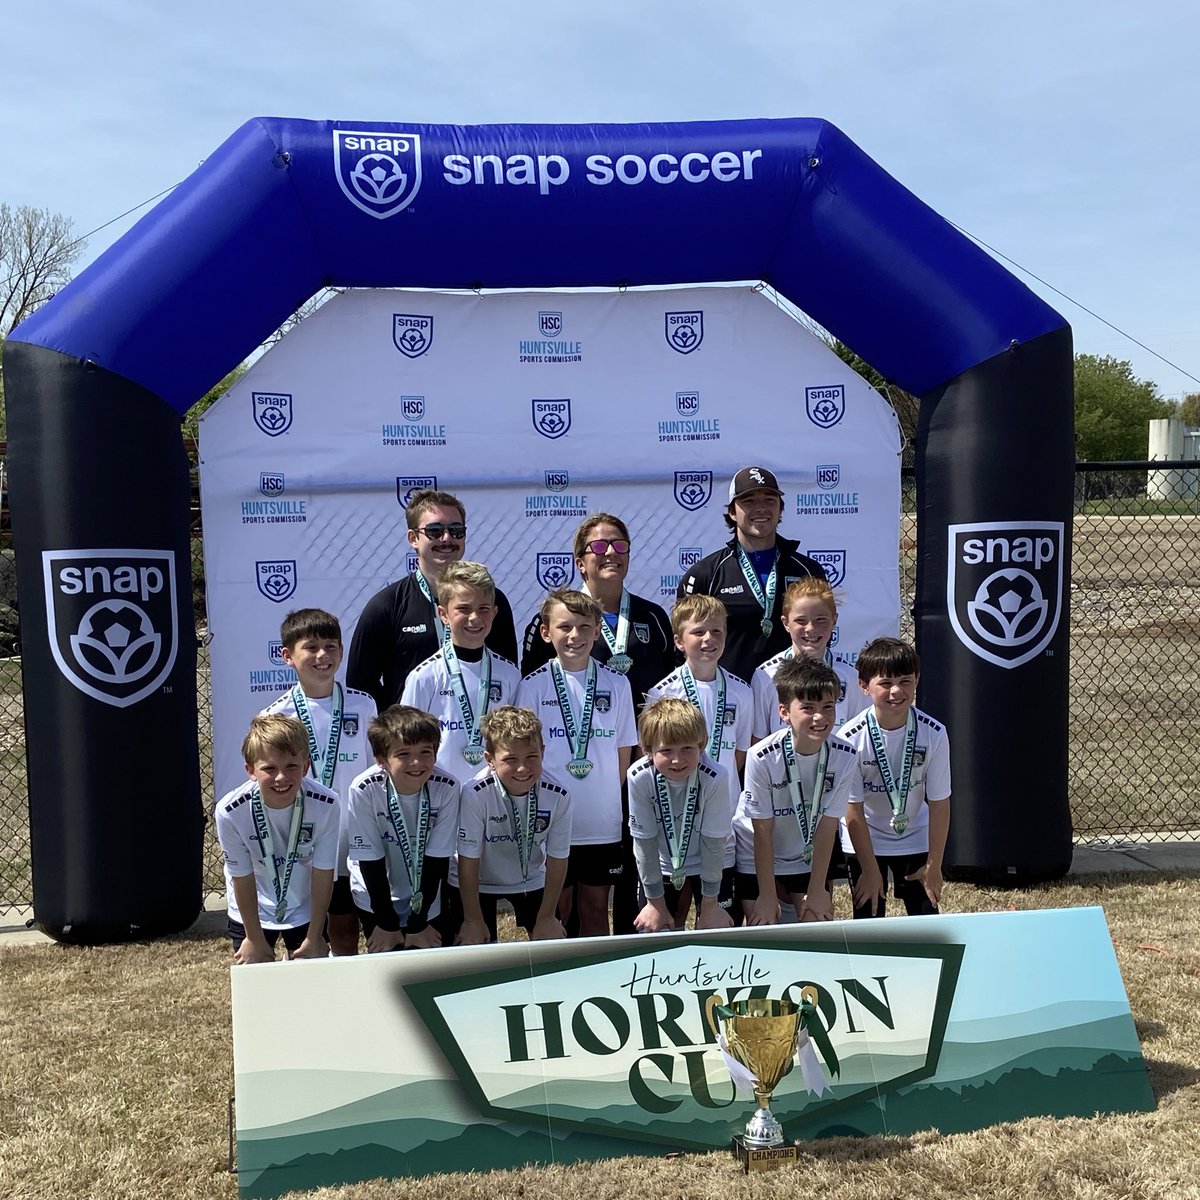 It’s been a busy weekend in Huntsville with several events across the city! This weekend Alabama beat Tennessee in the inaugural Rocket City Spring Shootout, several teams took the sand for the Sunbelt Midseason Tourney and over 100 teams competed in the Horizon Cup! #SportsHsv